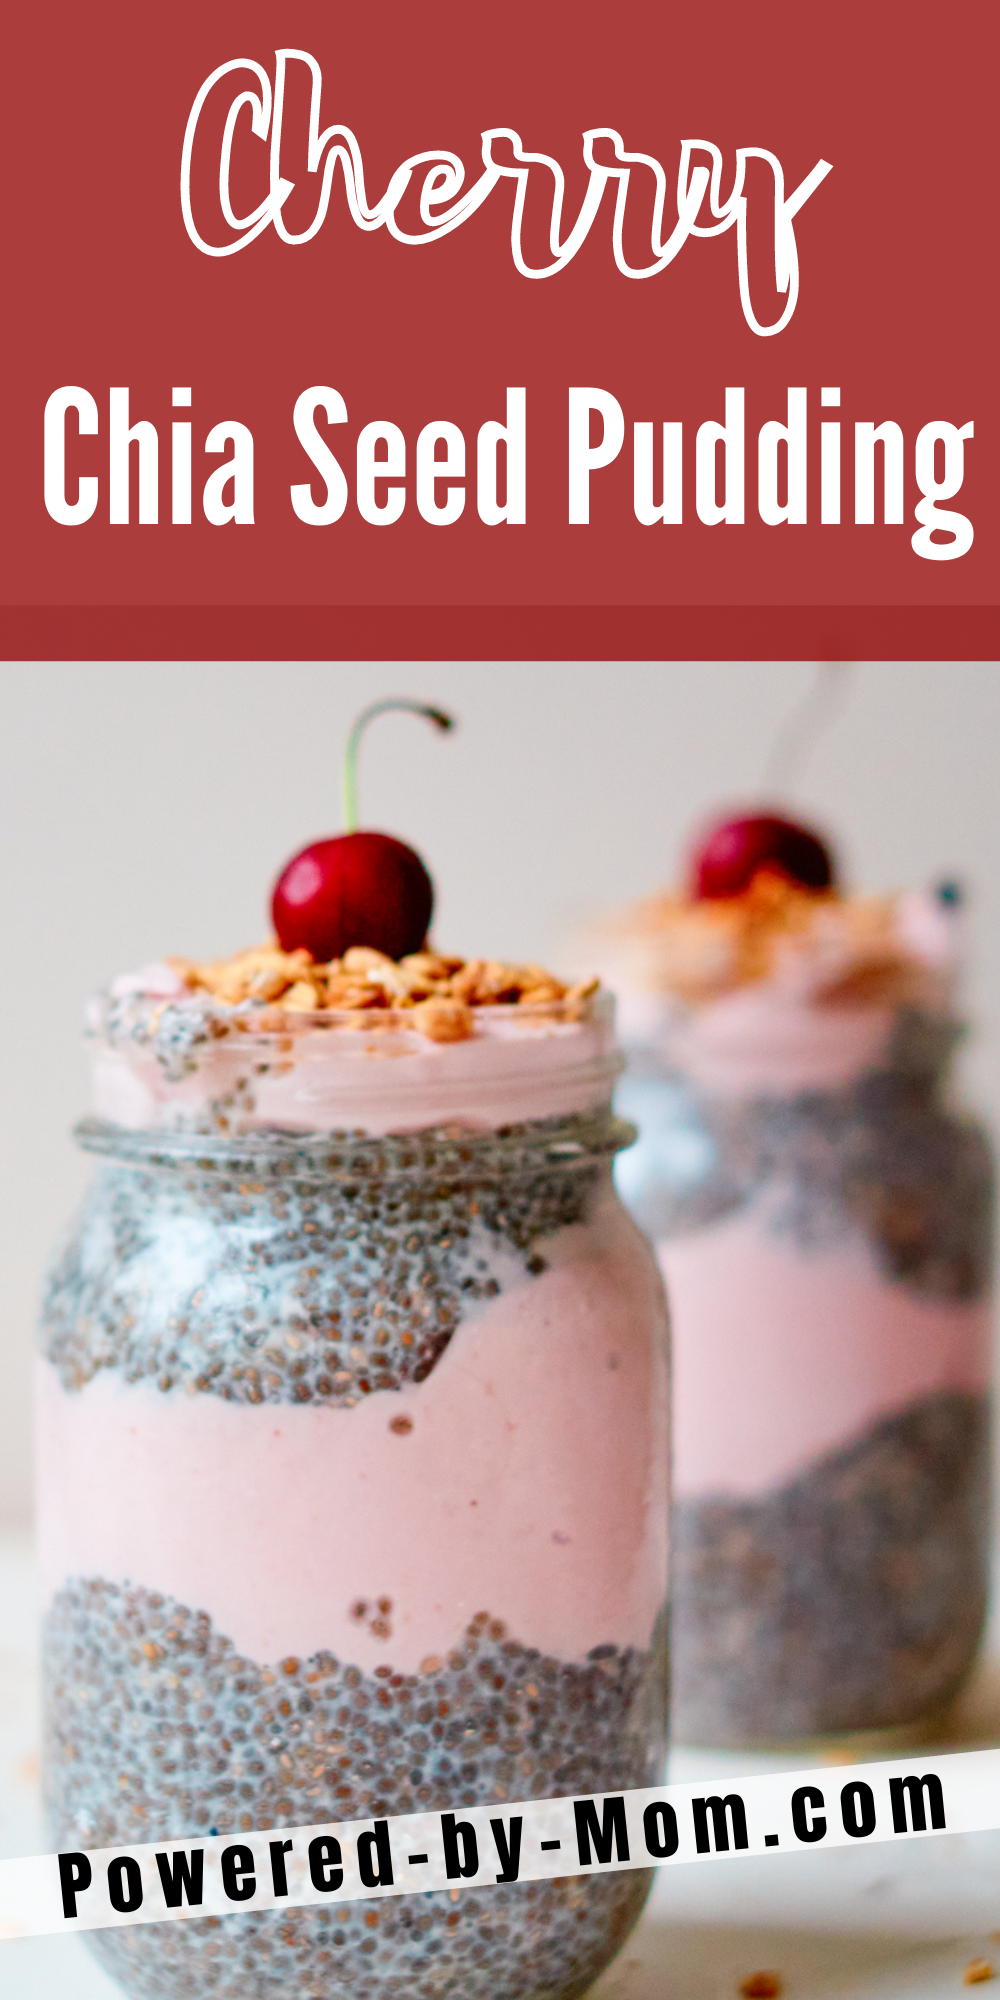 Need more protein and/or Omega-3s in your nutrition? Enjoy this delicious and healthy Cherry Chia Seed Pudding with Yogurt!